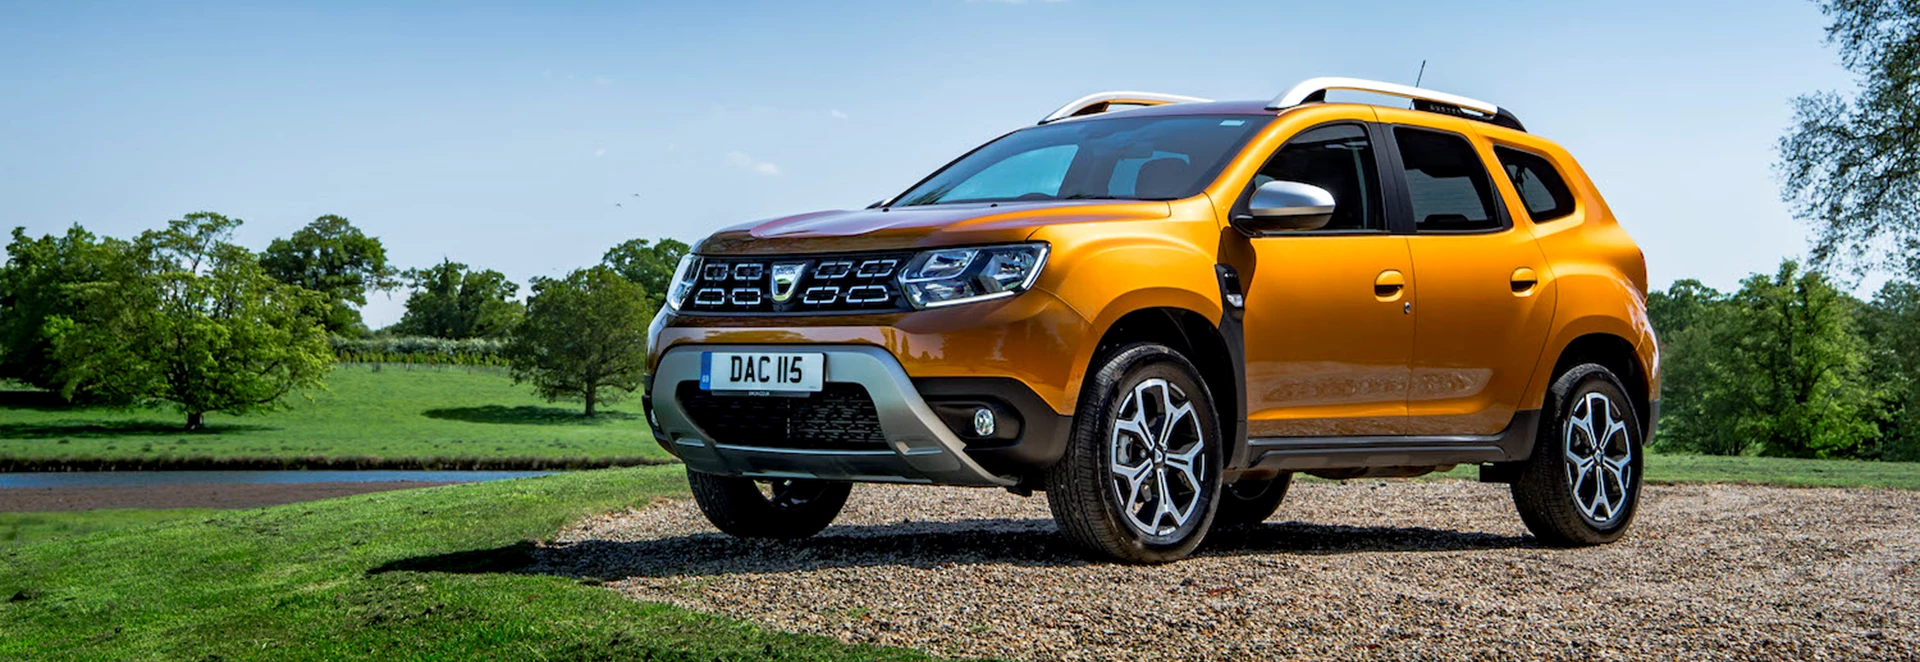 Bargain of the Year: Dacia Duster